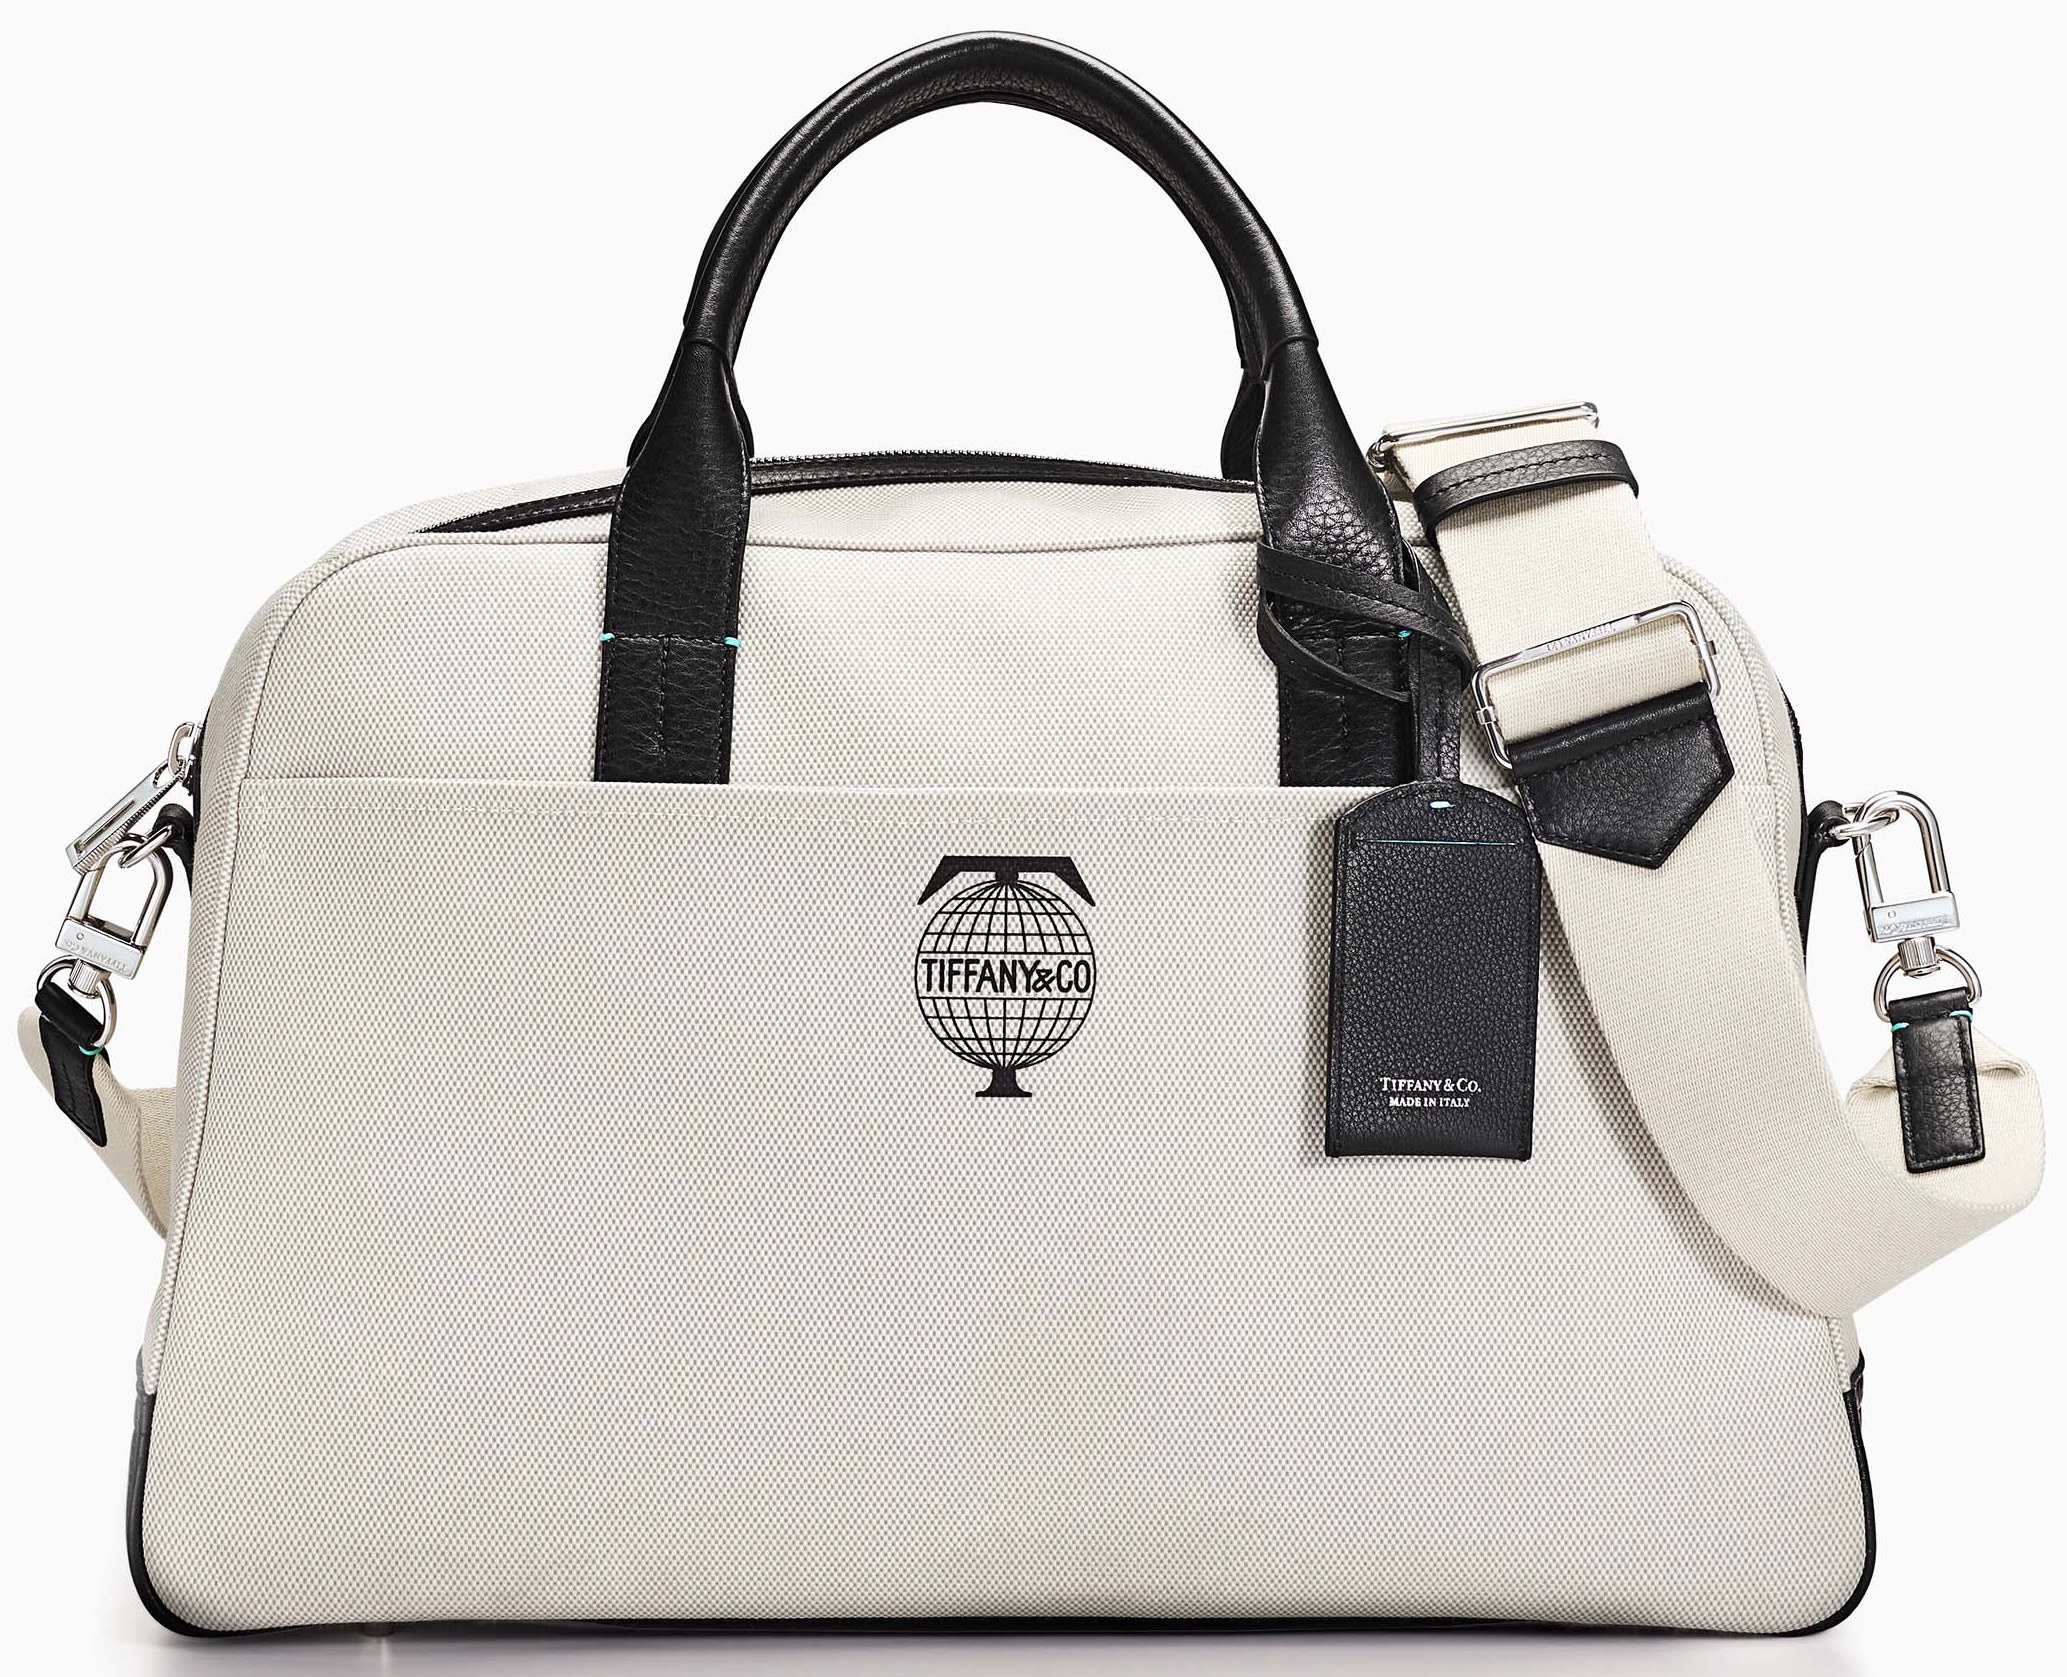 Tiffany Travel flight bag in cotton canvas with black grain leather accents